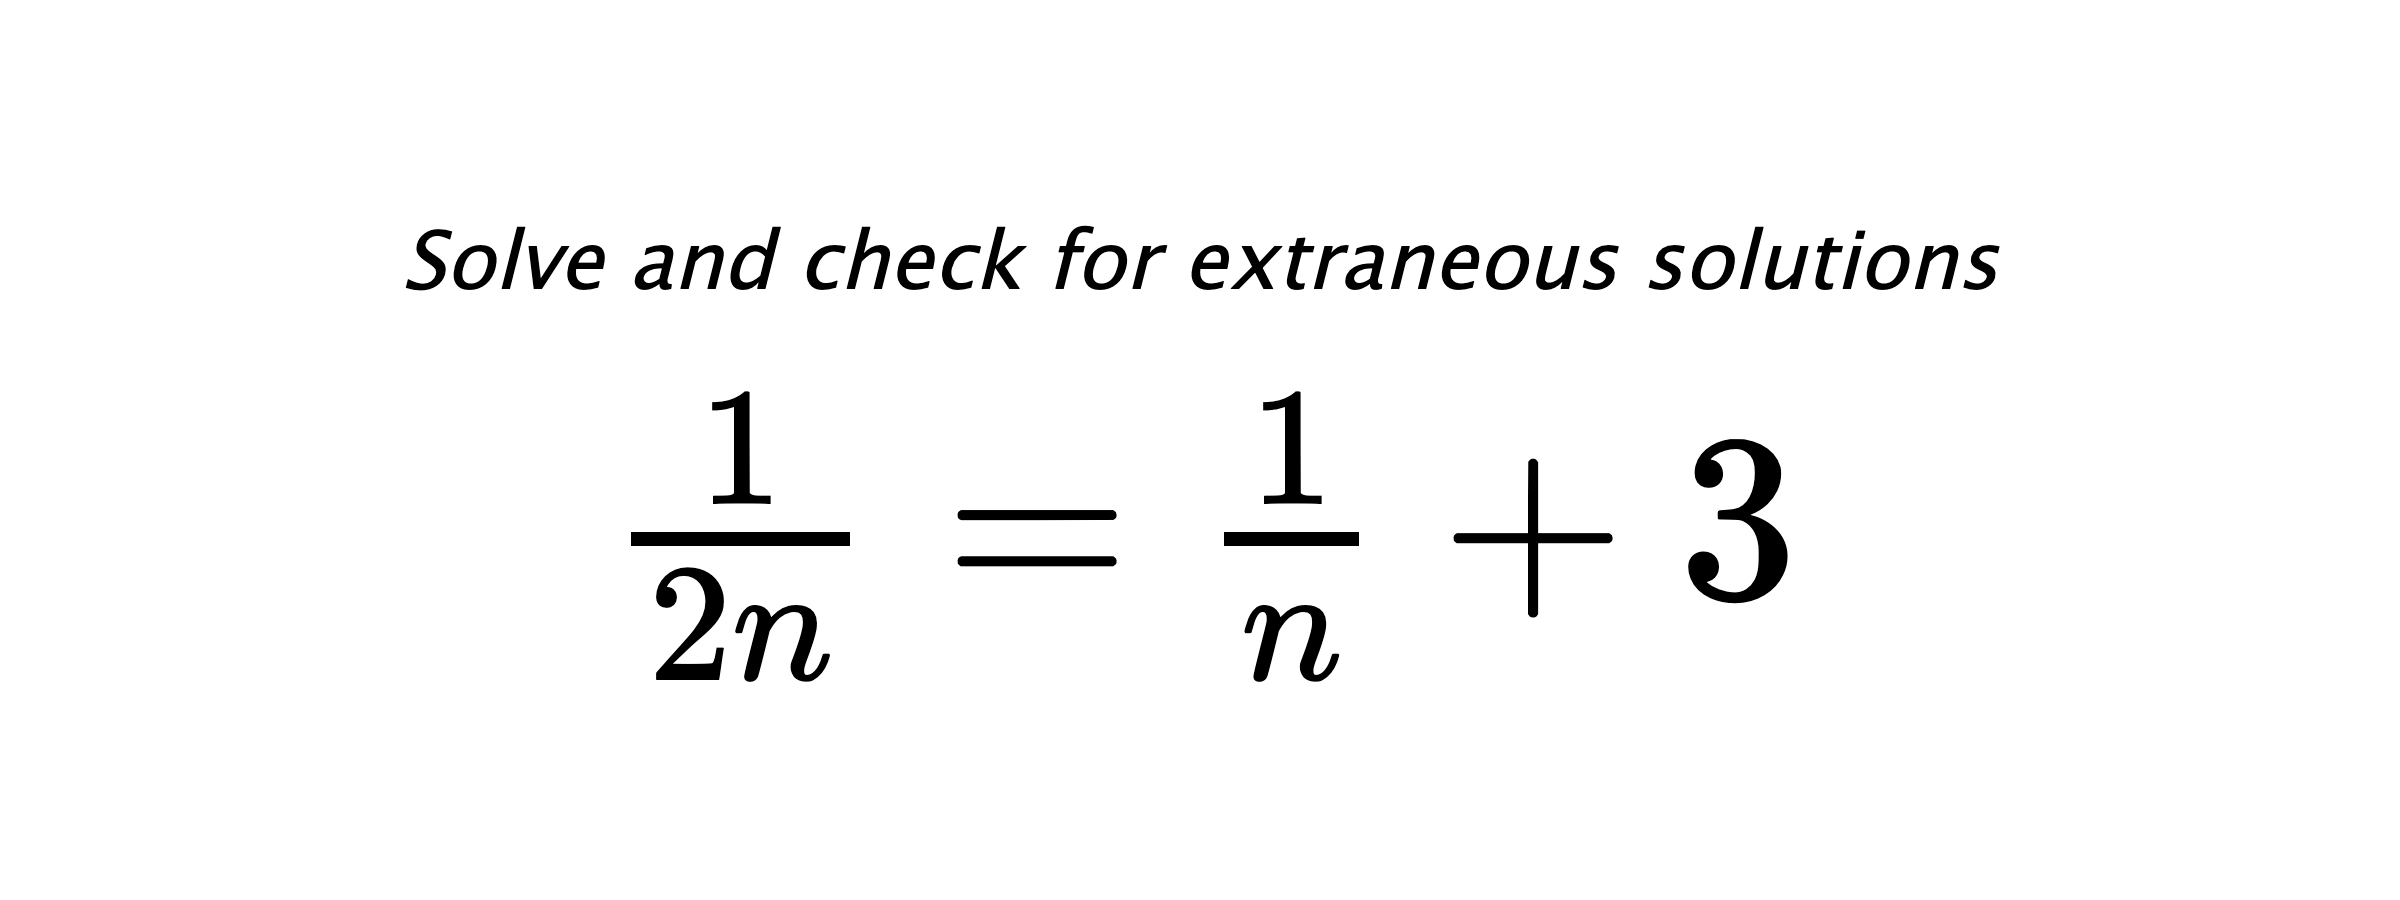 Solve and check for extraneous solutions $ \frac{1}{2n}=\frac{1}{n}+3 $